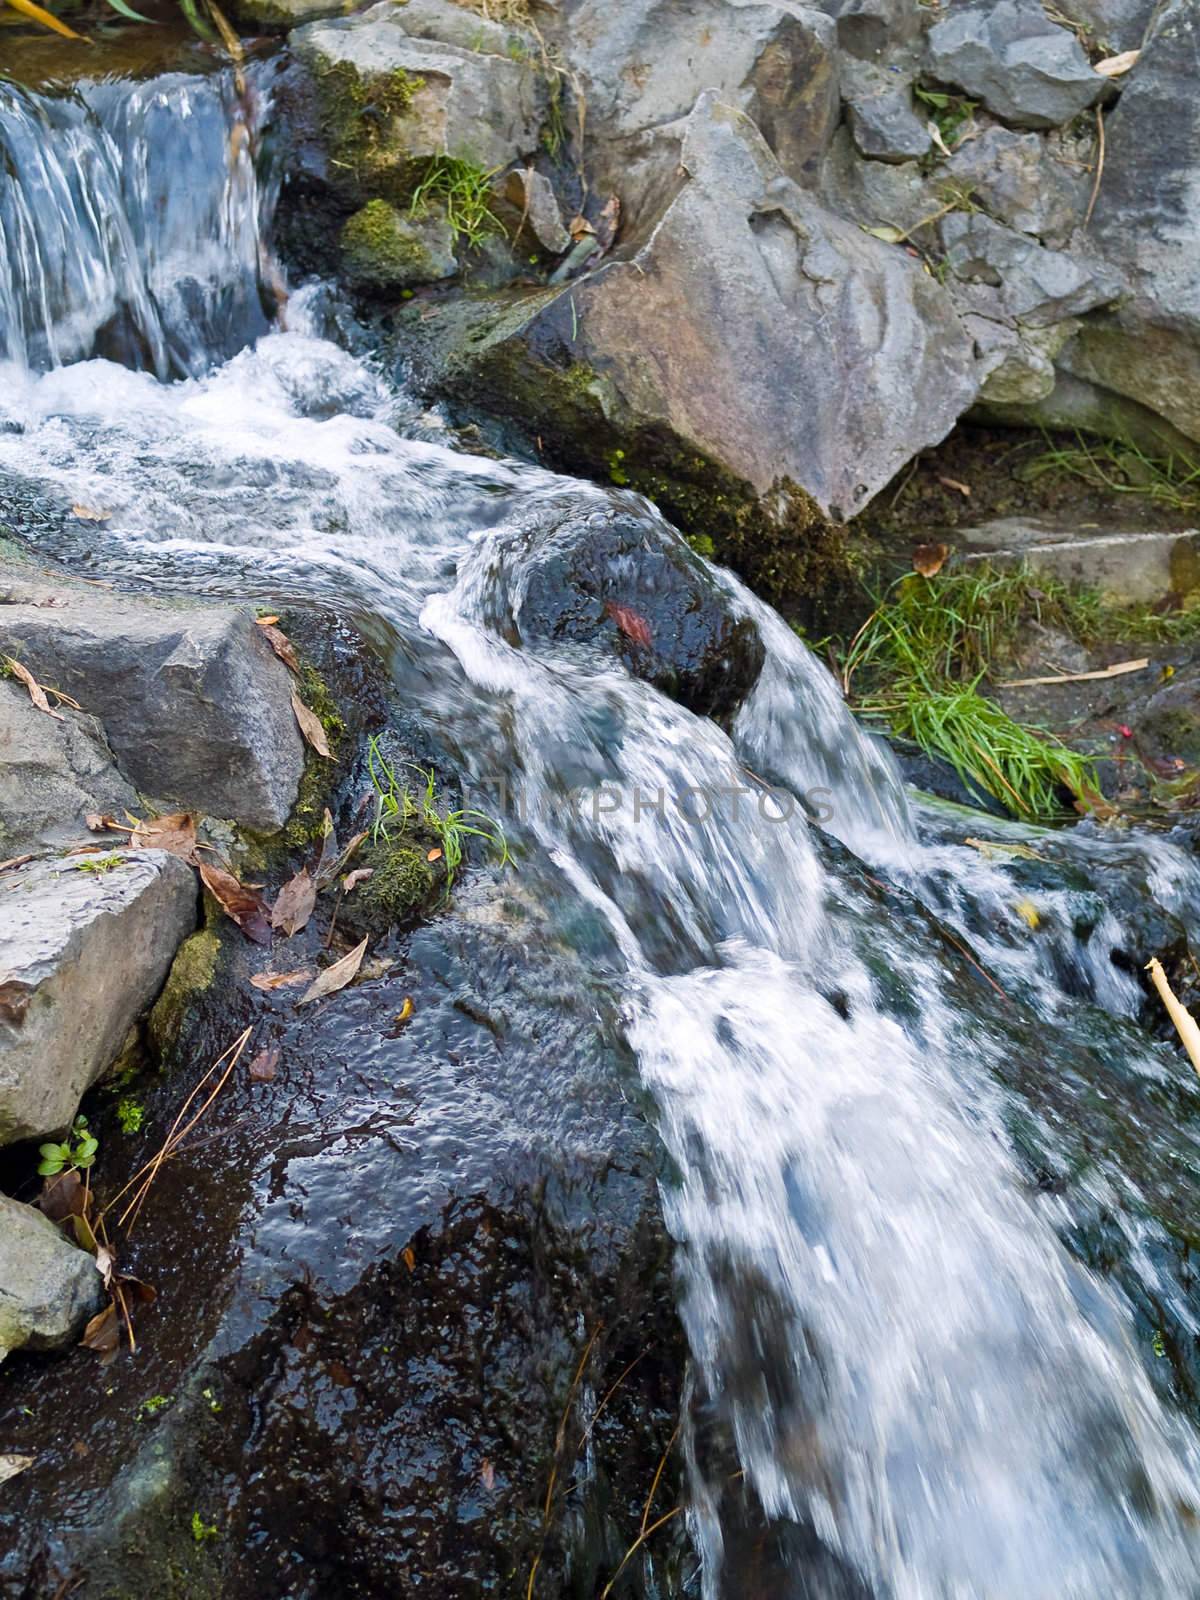 A Small Stream Flowing Over Some Rocks Makes a Waterfall